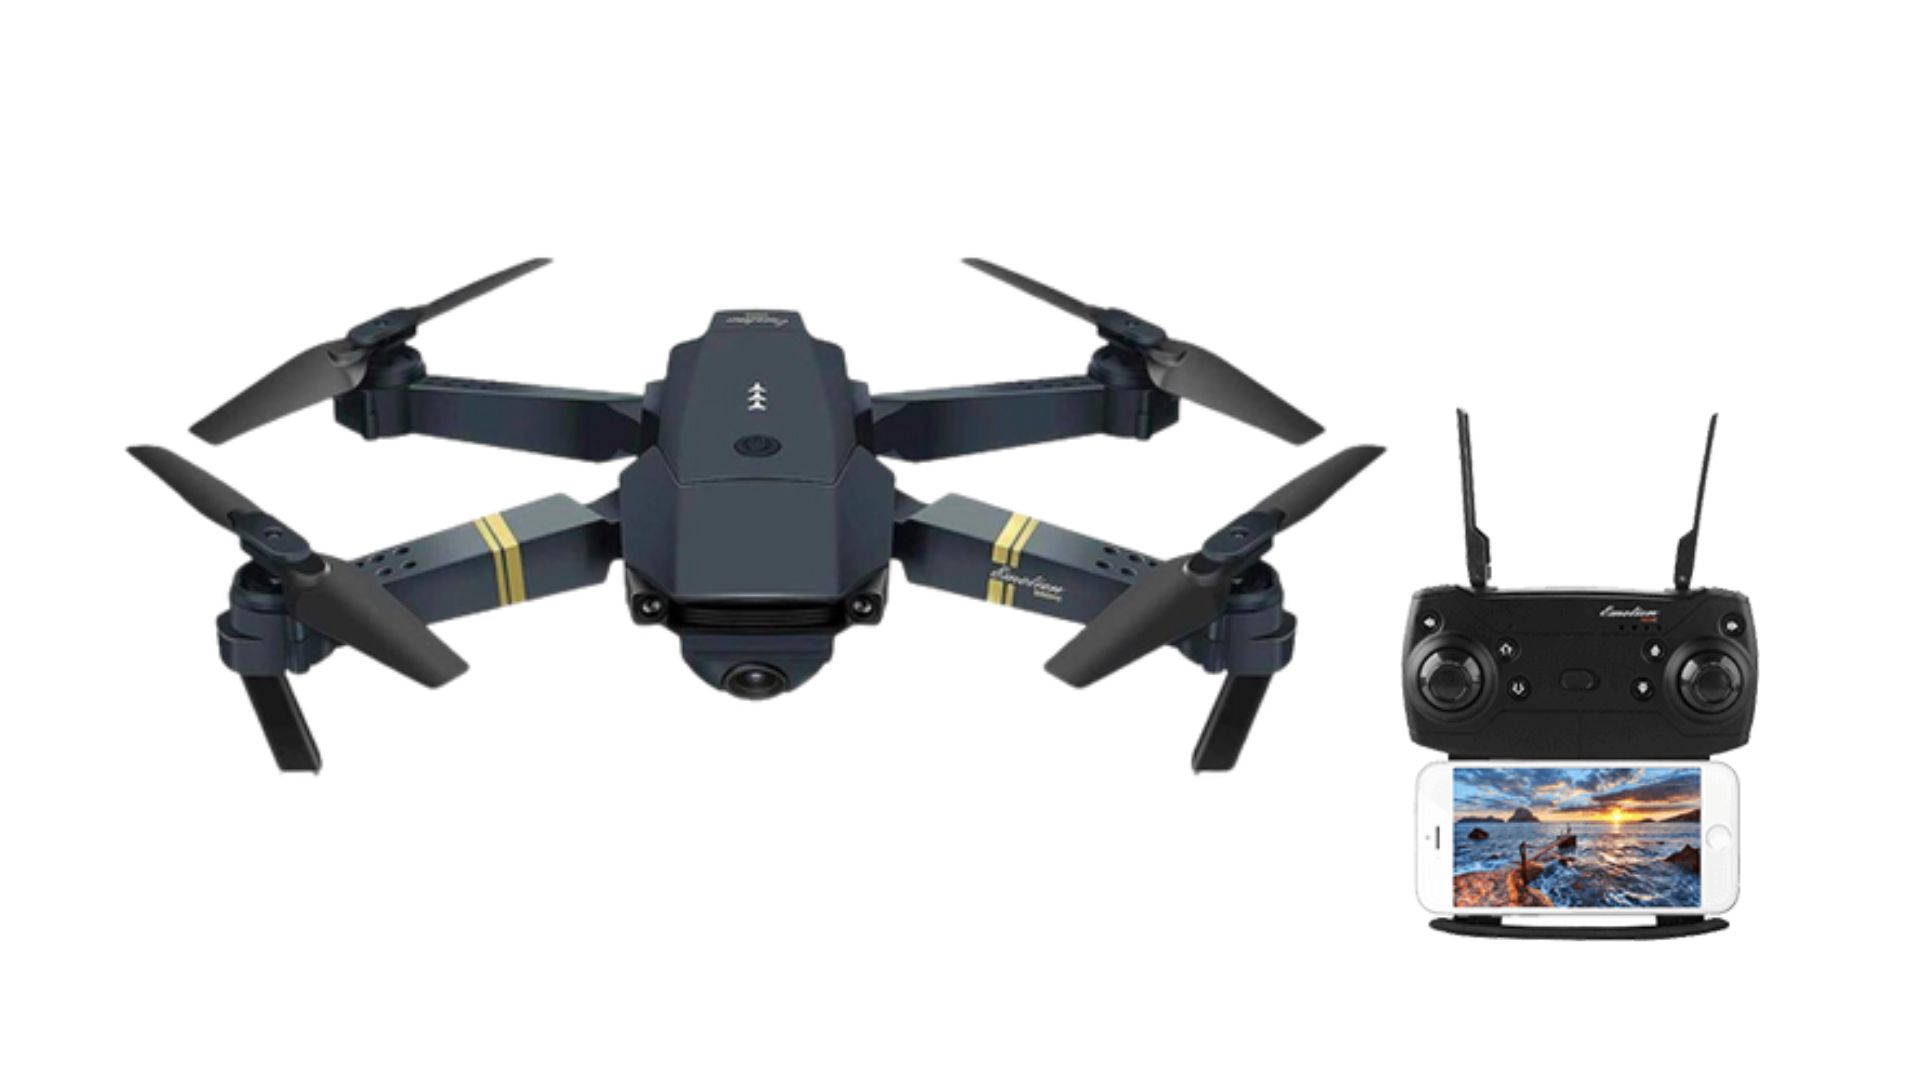 QuadAir Drone Reviews – Incredible Cameras, Flight Times, Durability, and at Affordable Price